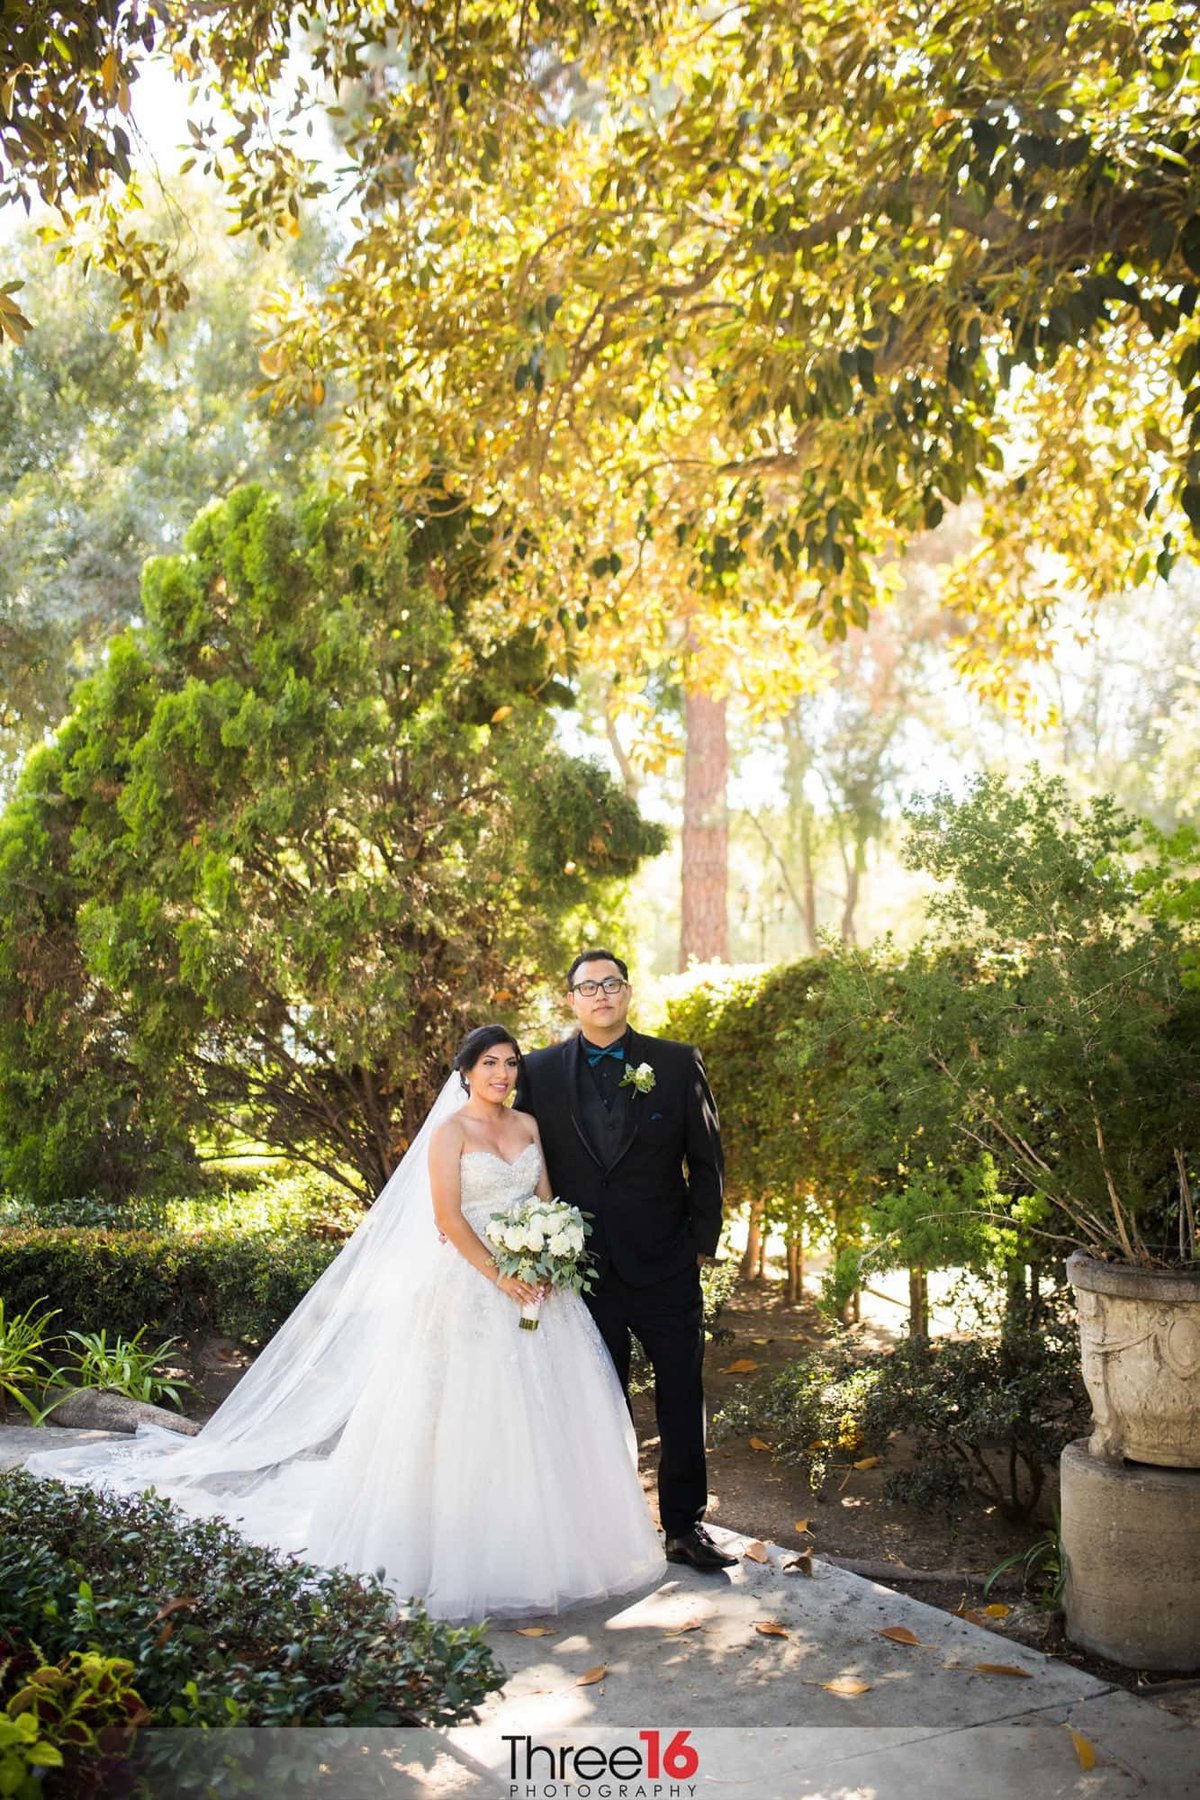 Bride and Groom pose together on a sidewalk surrounded by shrubs